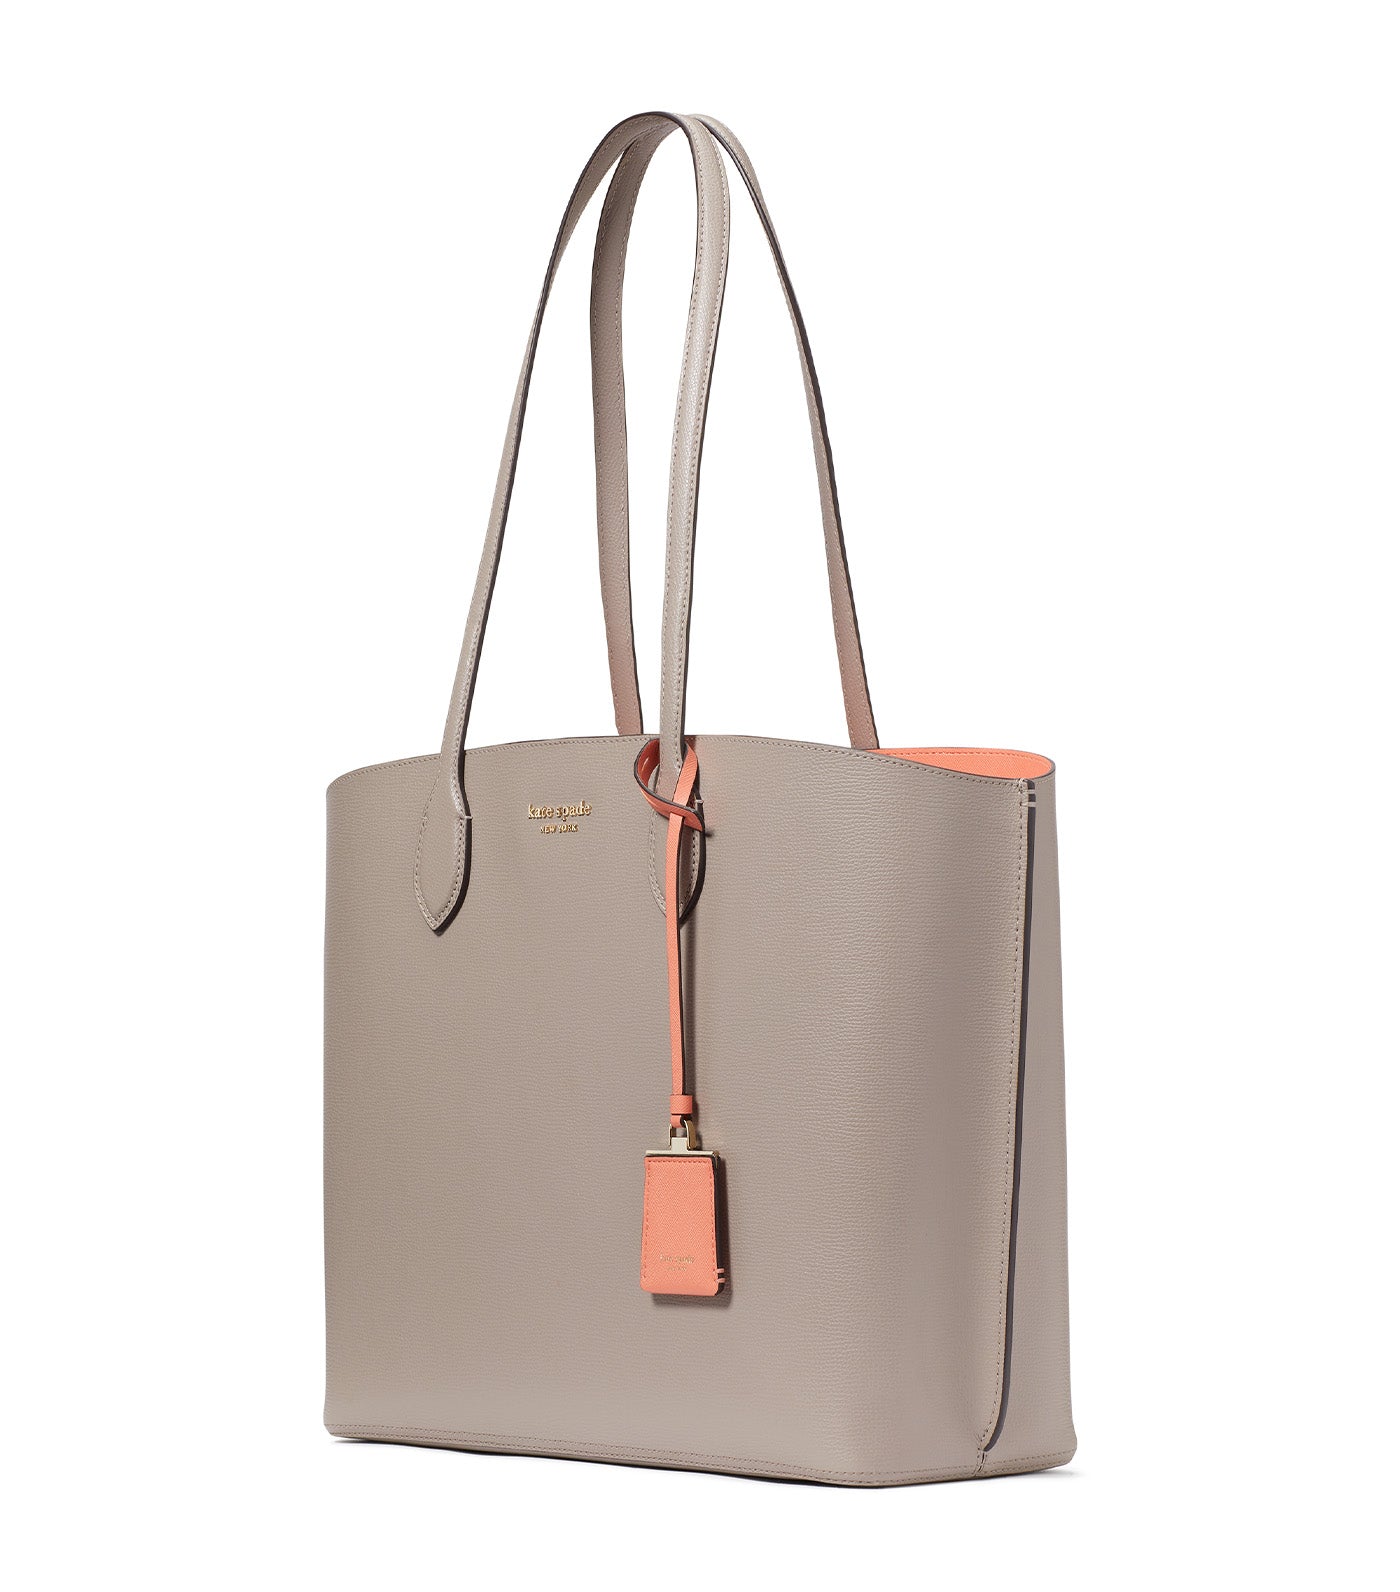 Suite Work Tote - Warm Taupe Multi